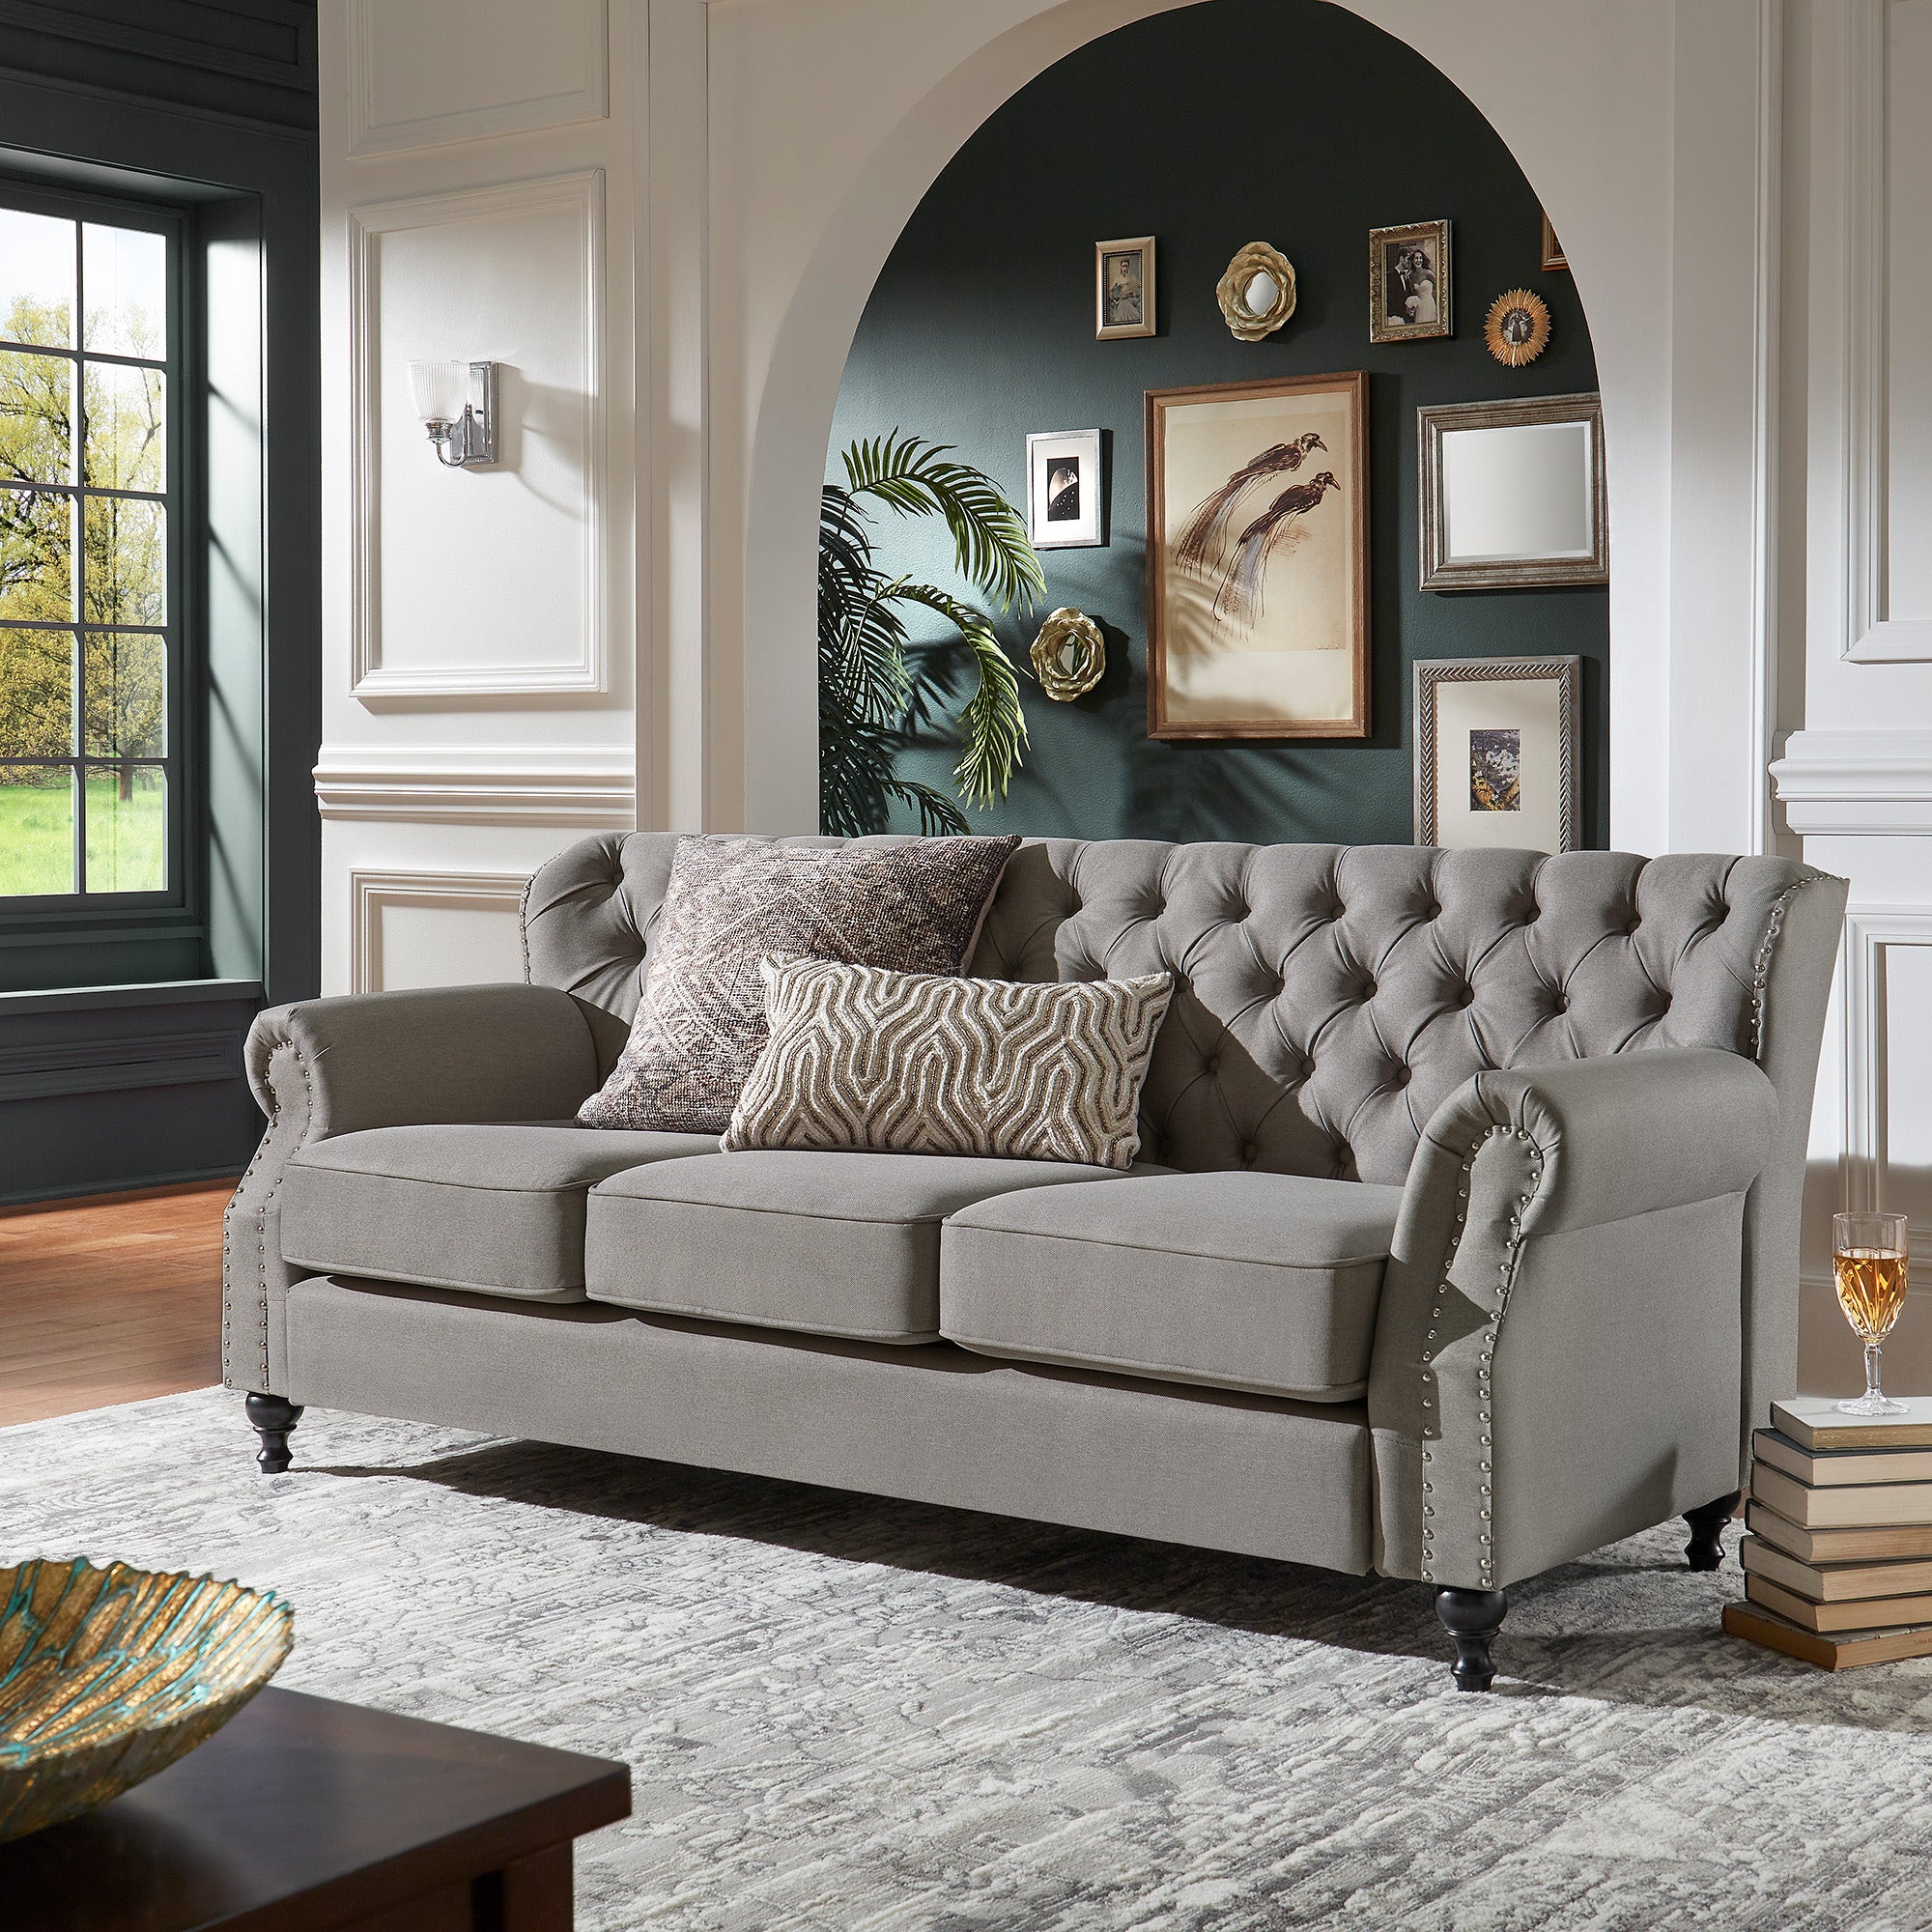 Grey Fabric On Tufted Sofa With